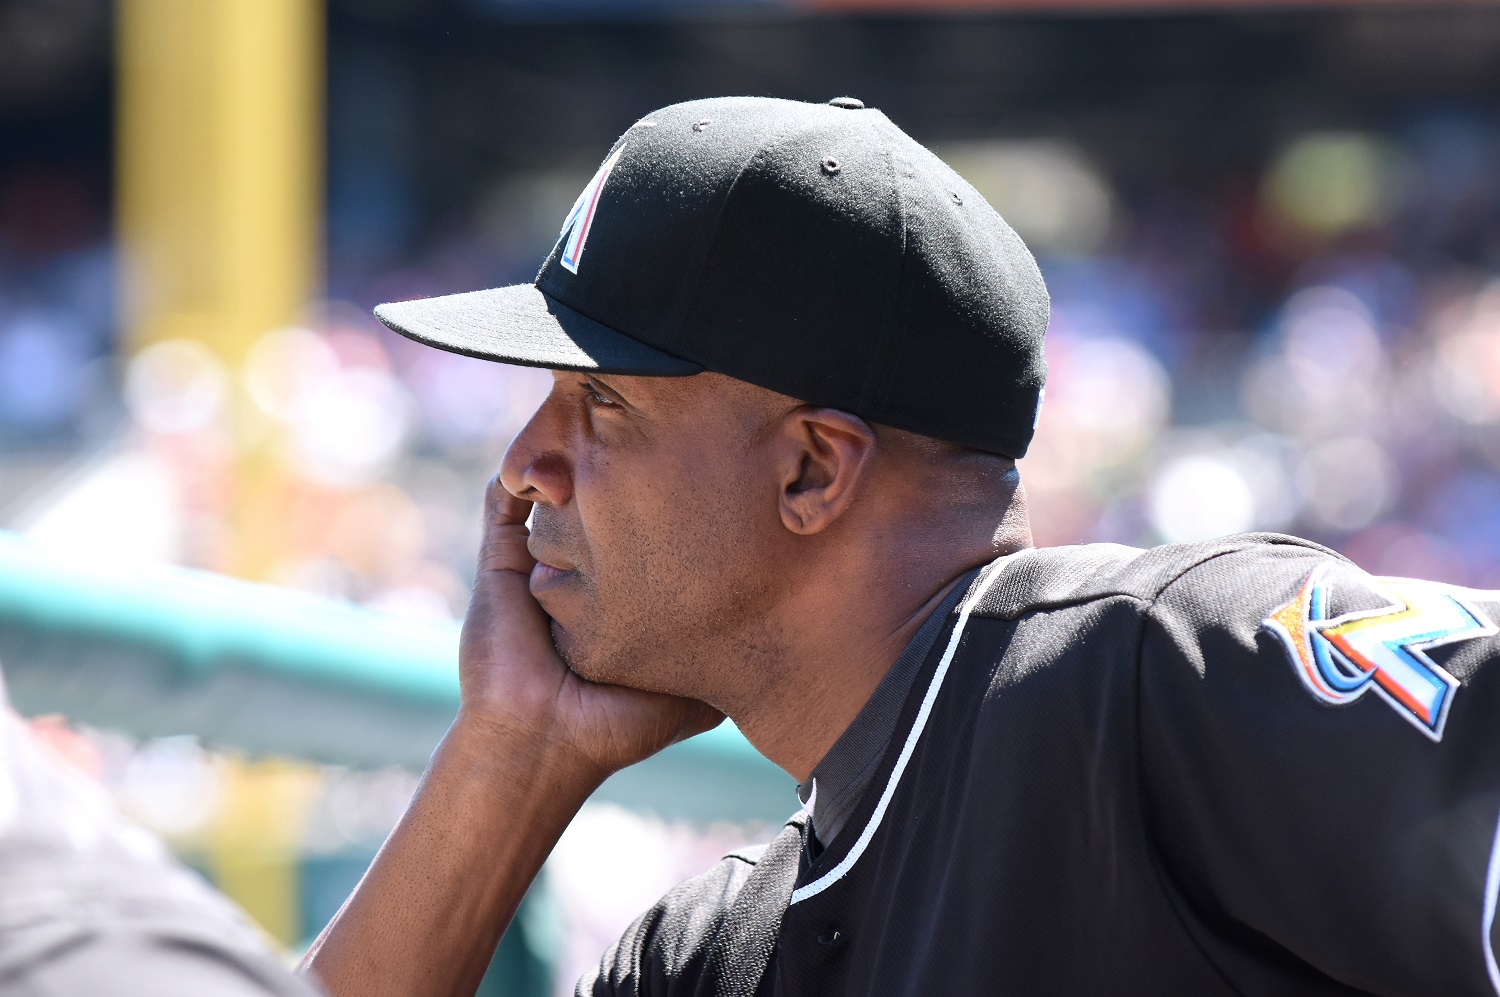 Barry Bonds, MLB's all-time leader in home runs, lasted one season as the hitting coach of the Miami Marlins. | Mark Cunningham/MLB Photos via Getty Images